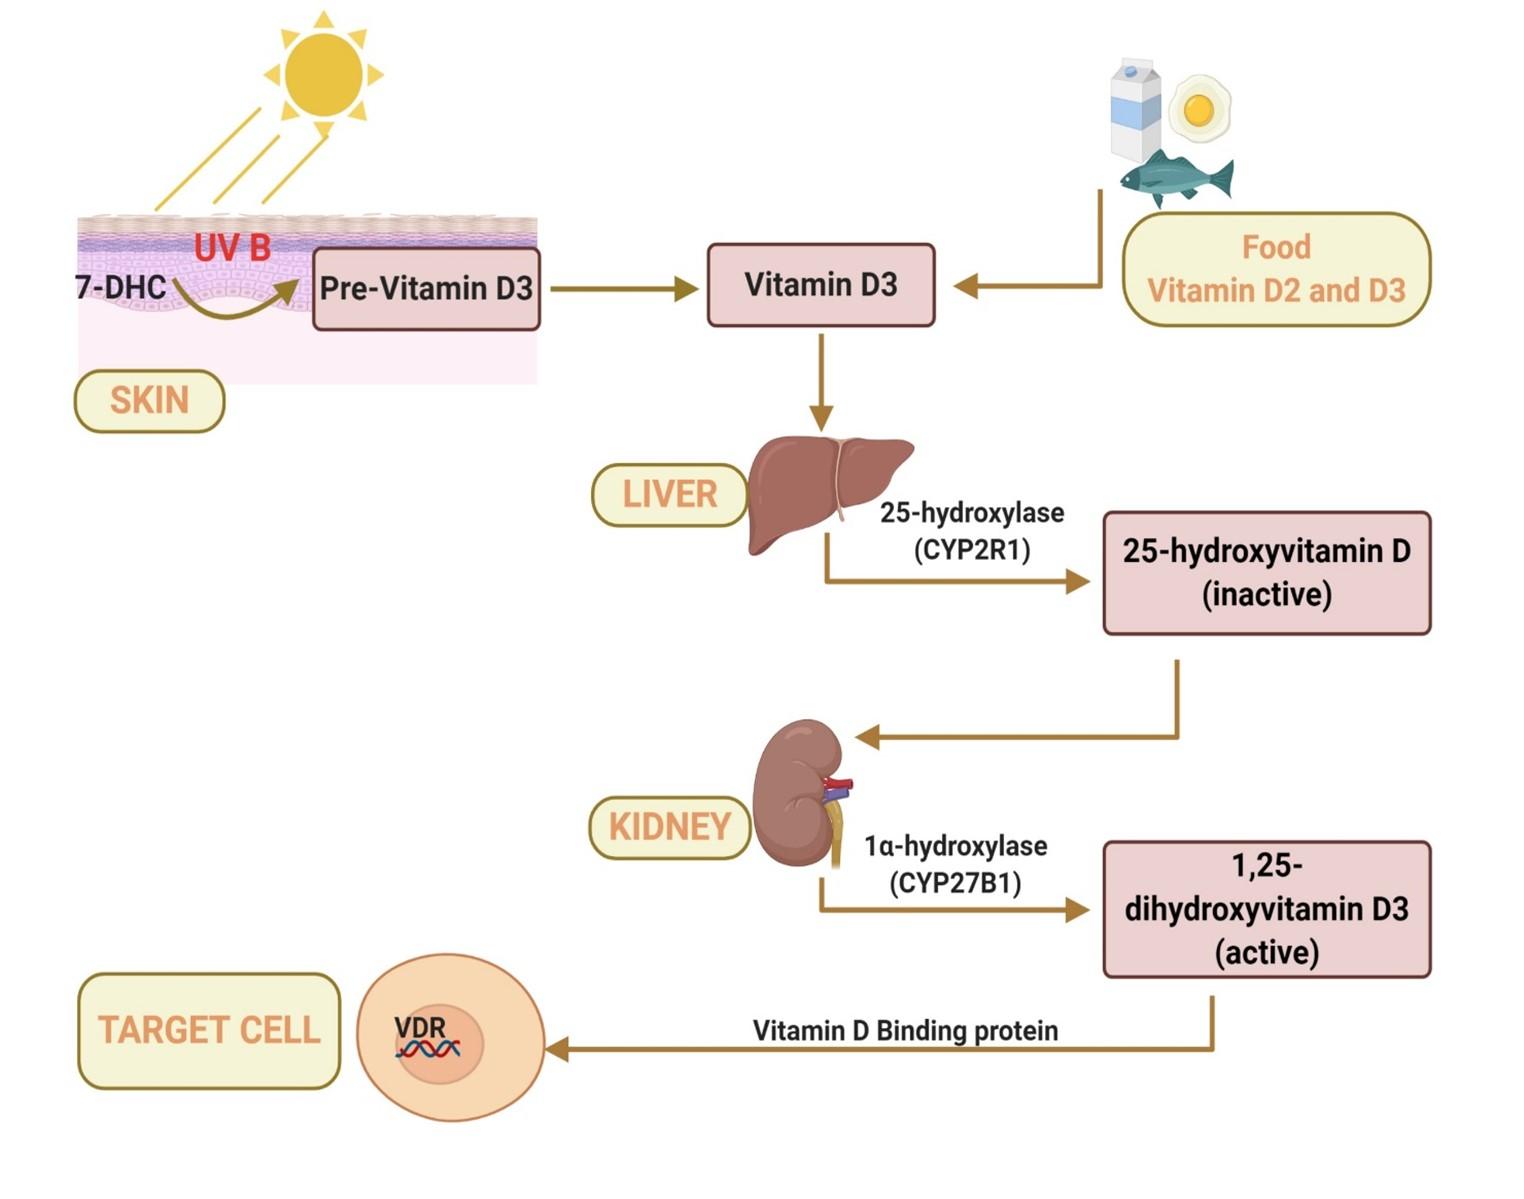 Potential roles of vitamin D in the treatment of COVID-19 patient and improving maternal and child health during pandemic